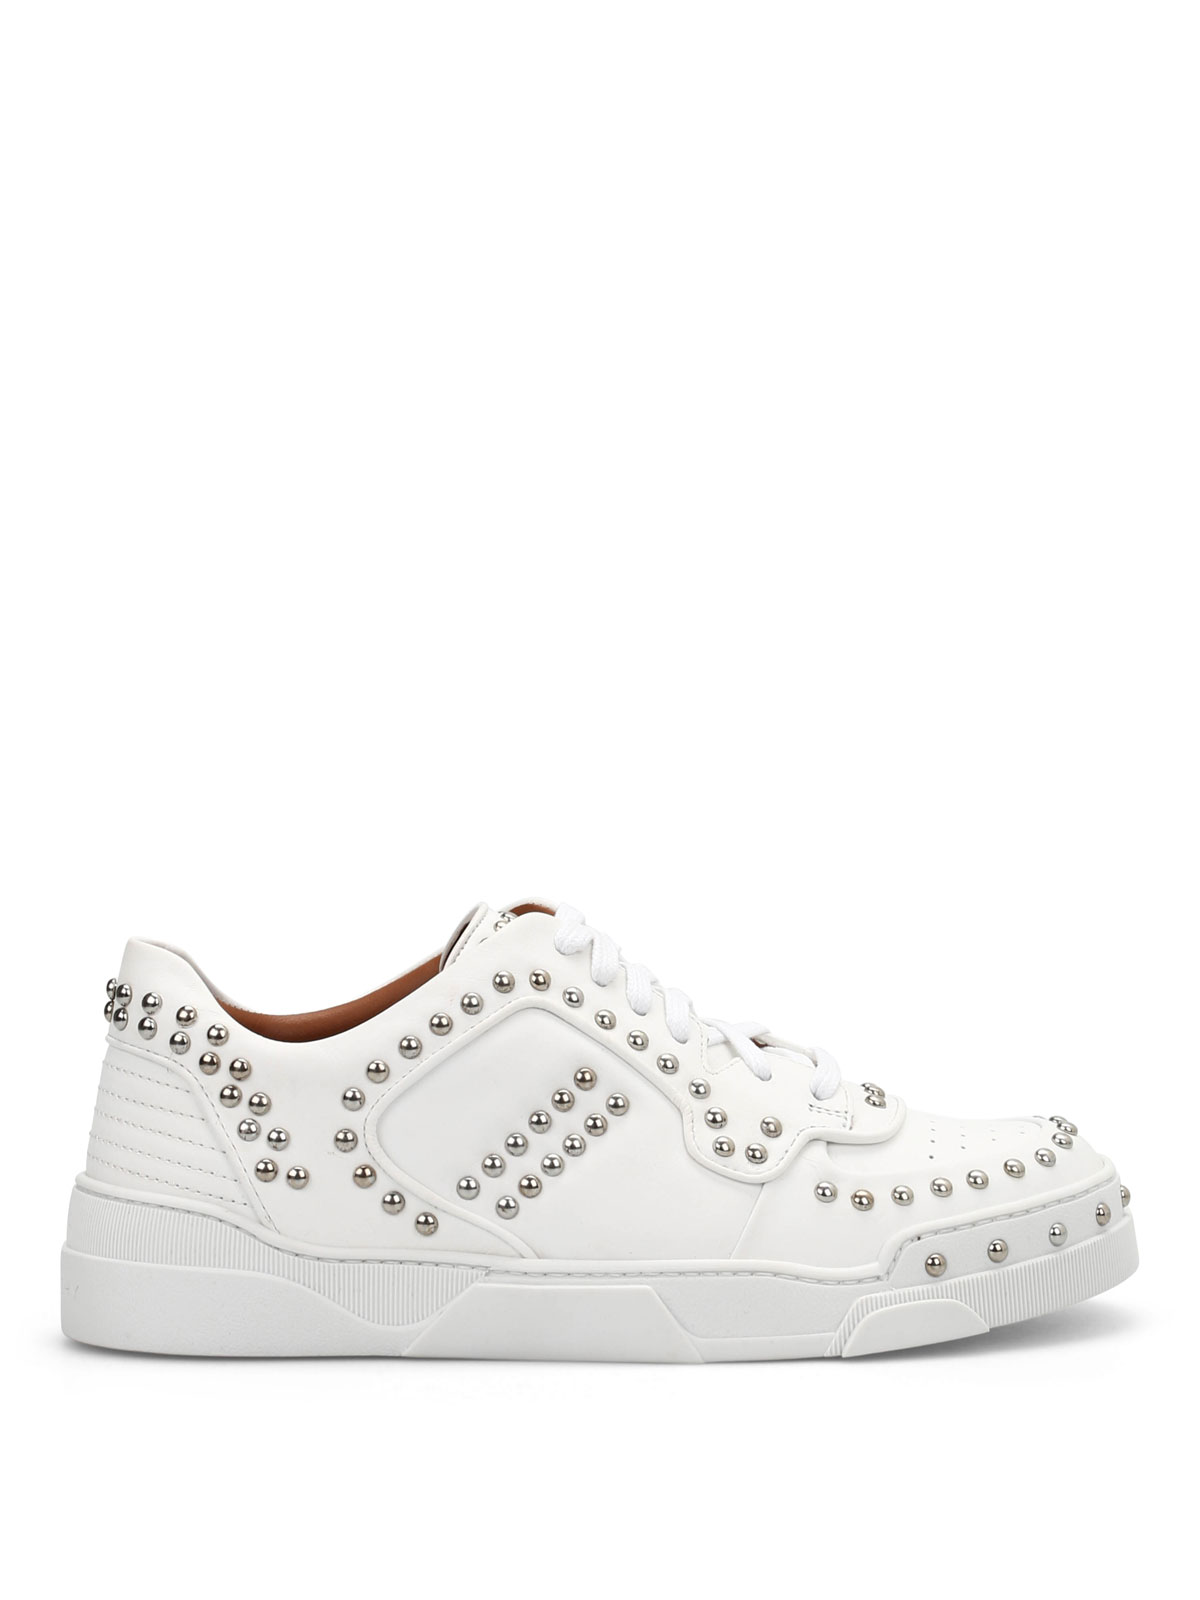 Givenchy - Tyson II studded sneakers - trainers - BE08757158100